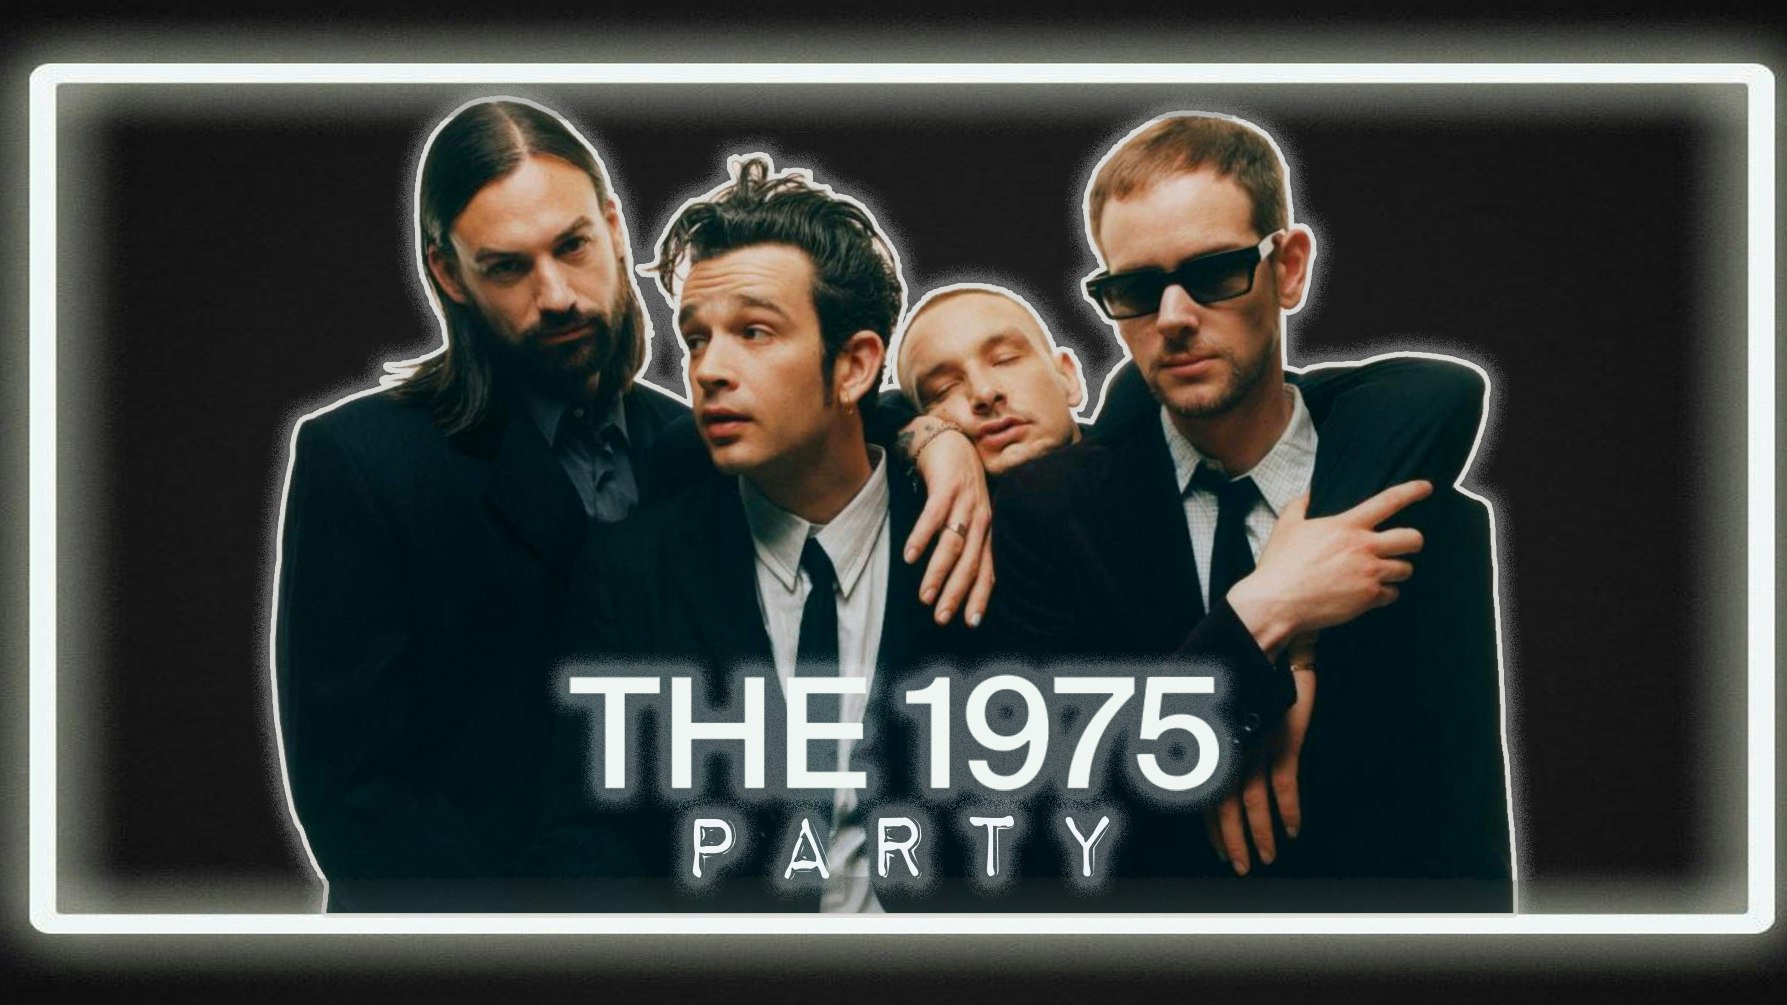 The 1975 Party